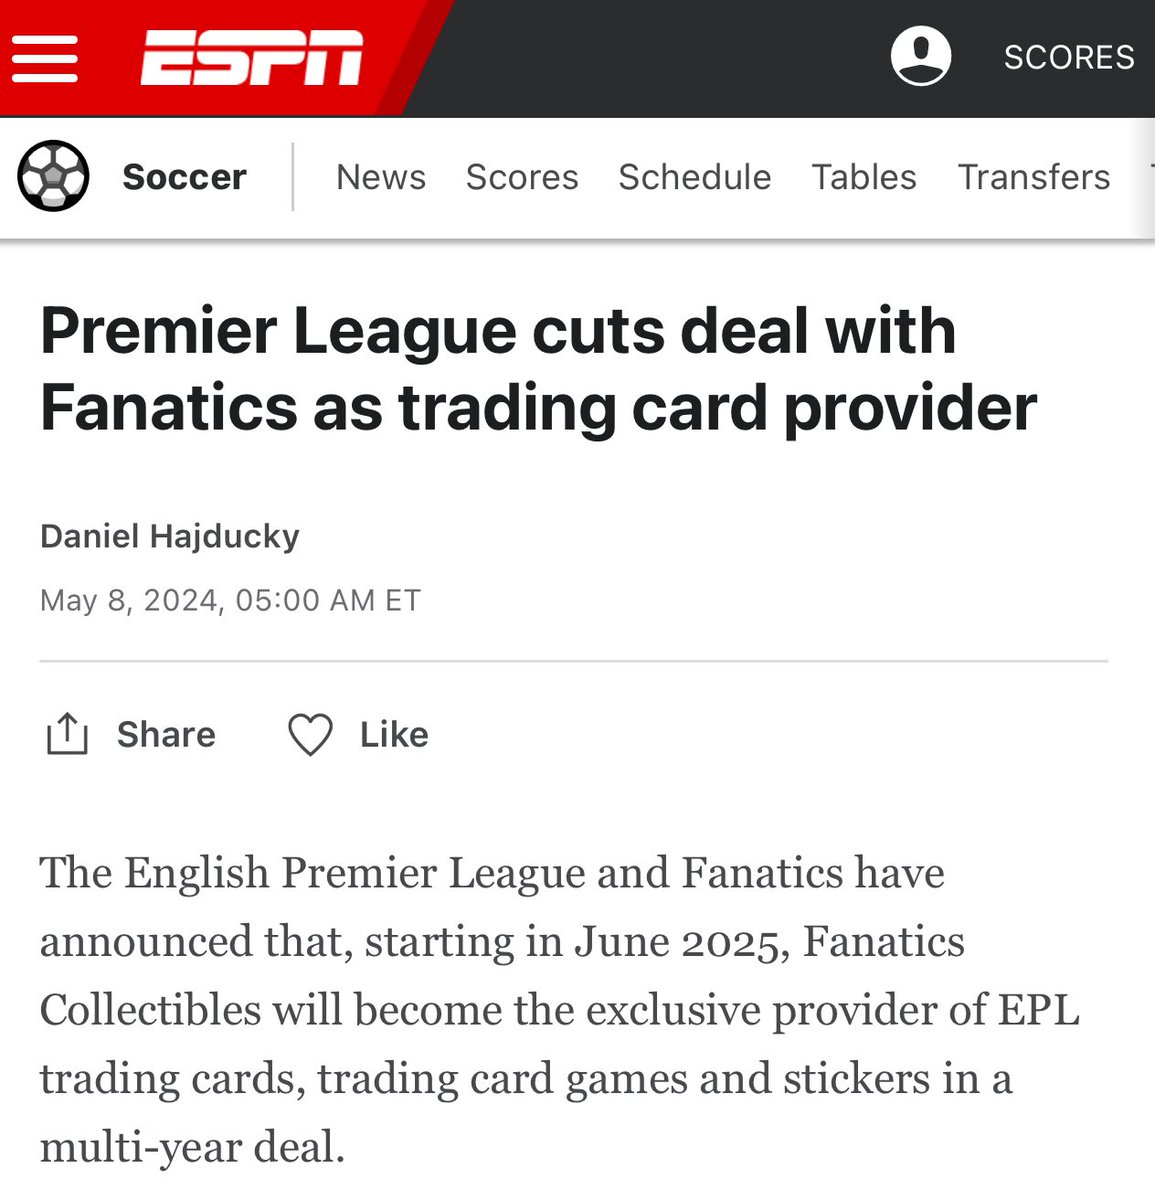 𝗕𝗥𝗘𝗔𝗞𝗜𝗡𝗚: Fanatics Collectibles is partnering with the Premier League on a multi-year exclusive deal for trading cards, TCGs, and stickers. For the first time since 2018/19, Topps x Premier League cards will be available for the 2025/26 season.